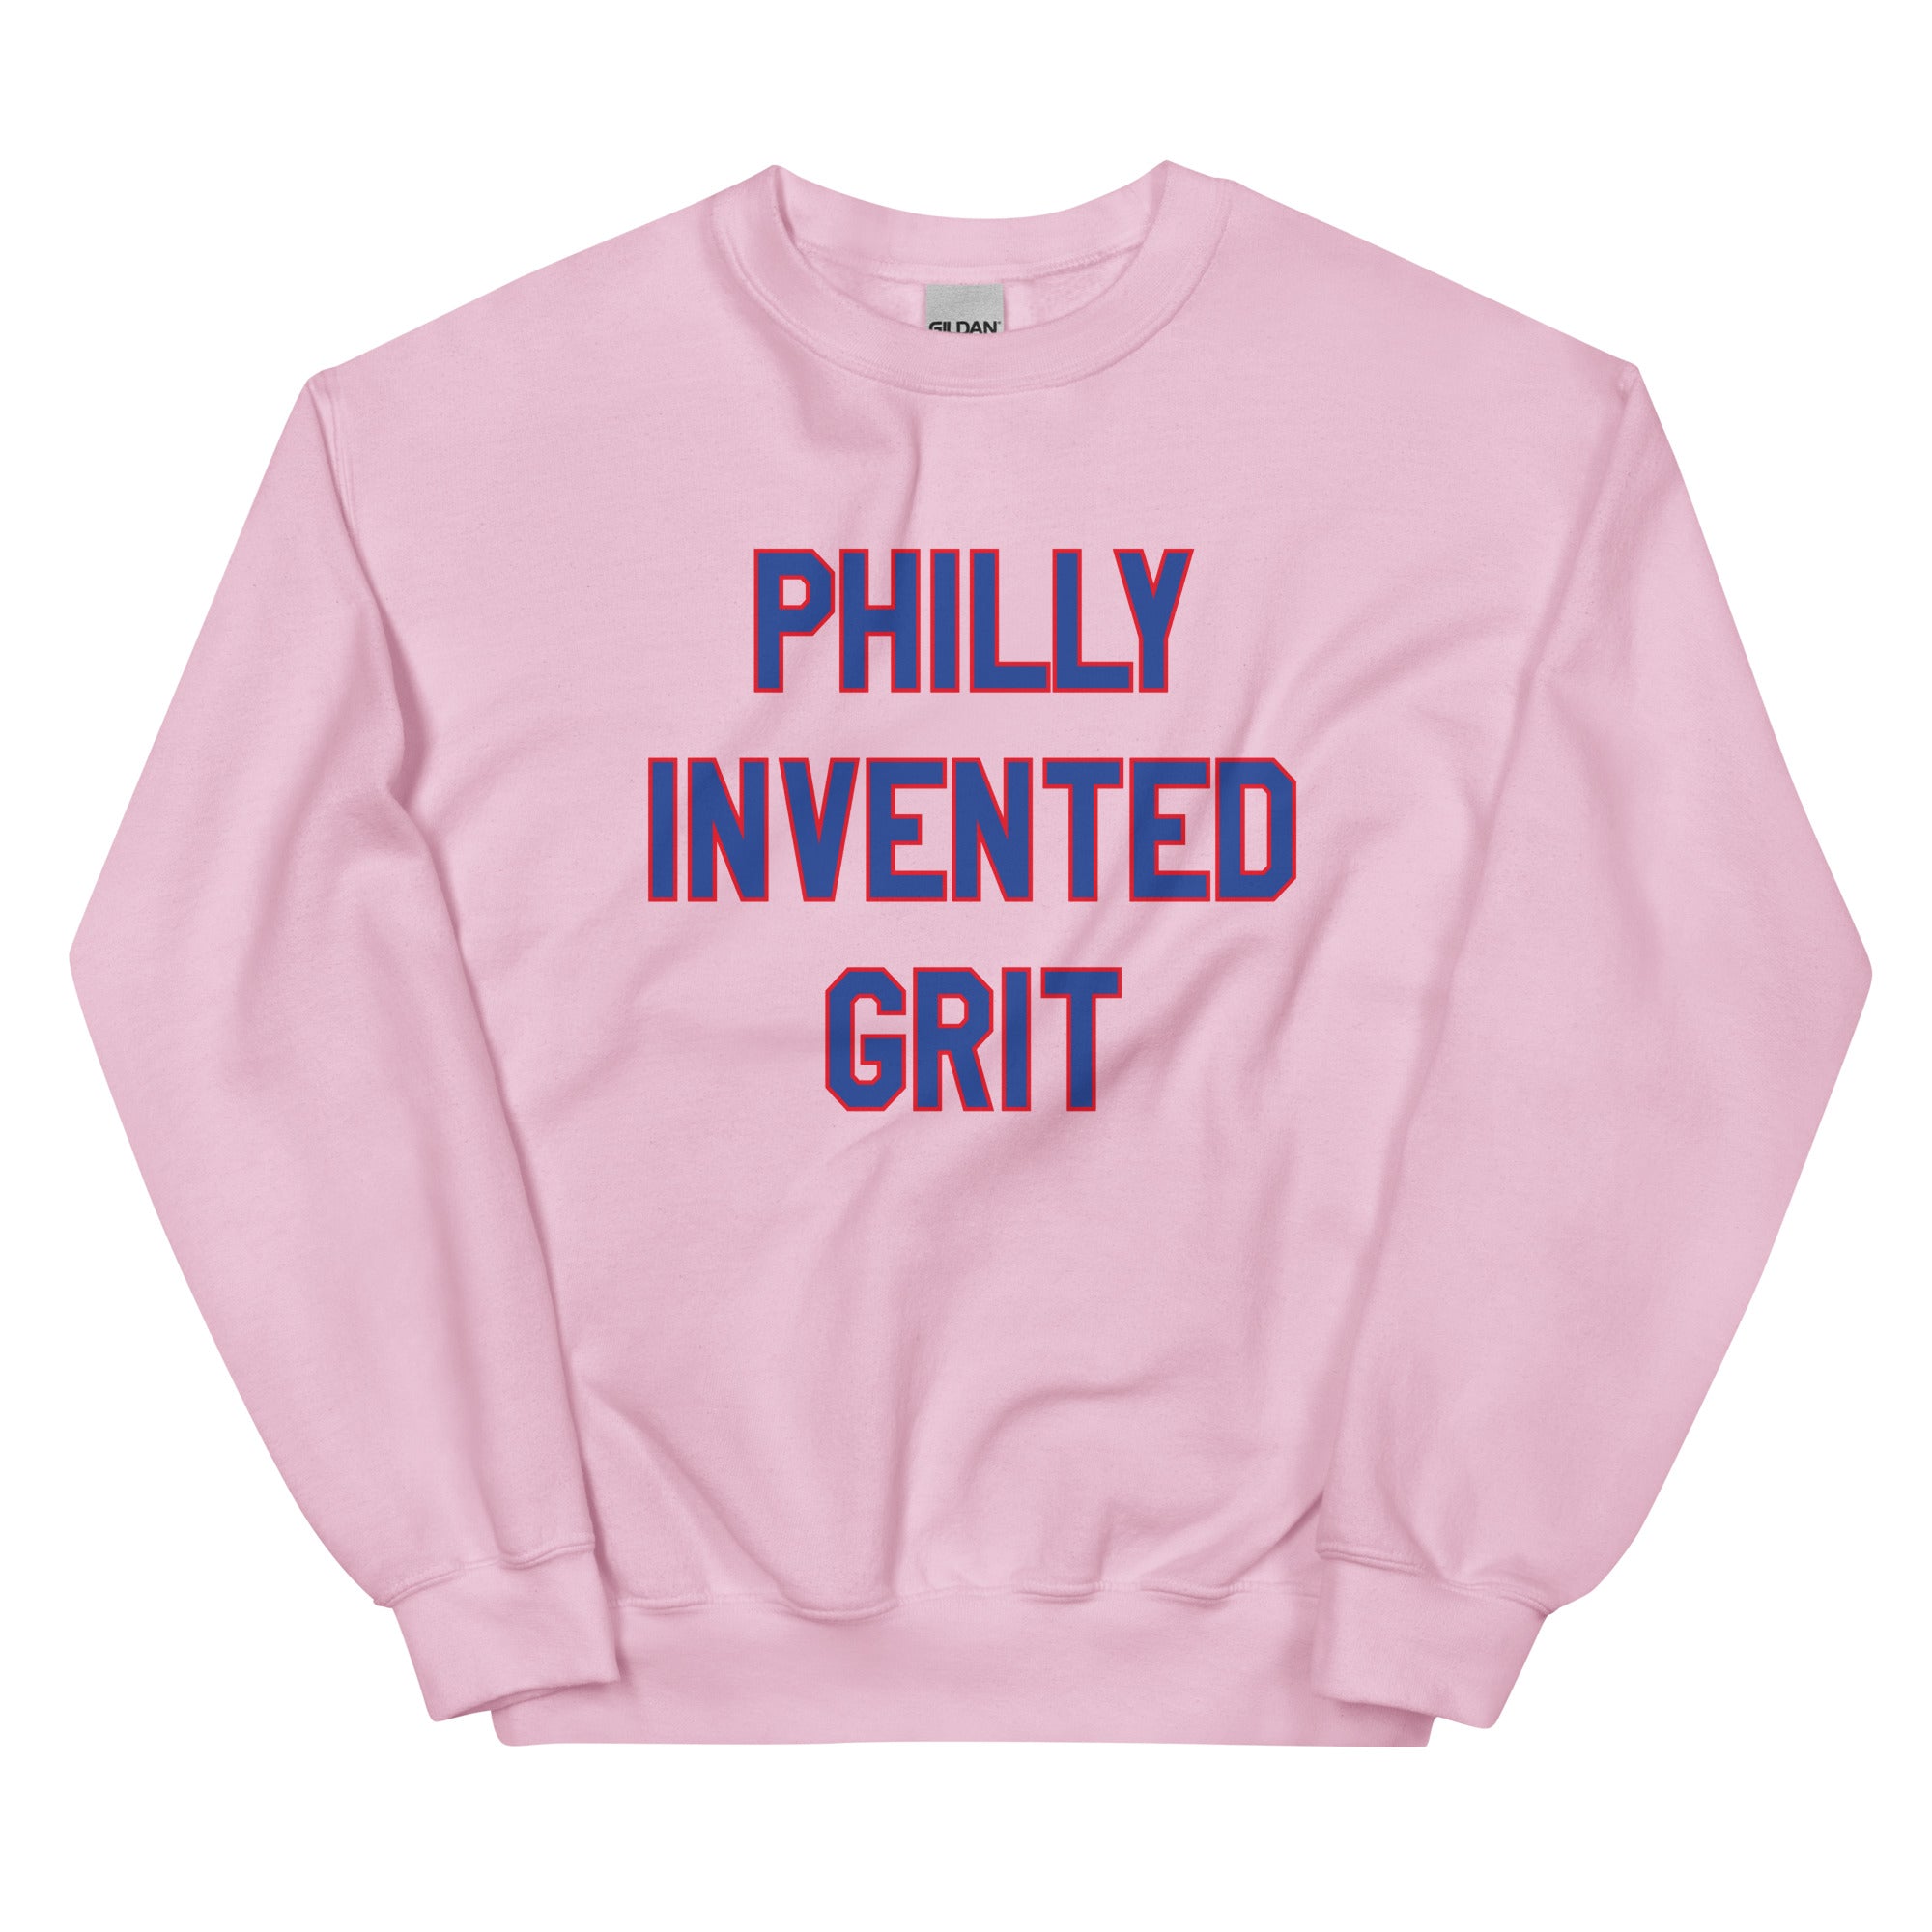 Philadelphia Flyers Philly invented grit pink sweatshirt Phillygoat